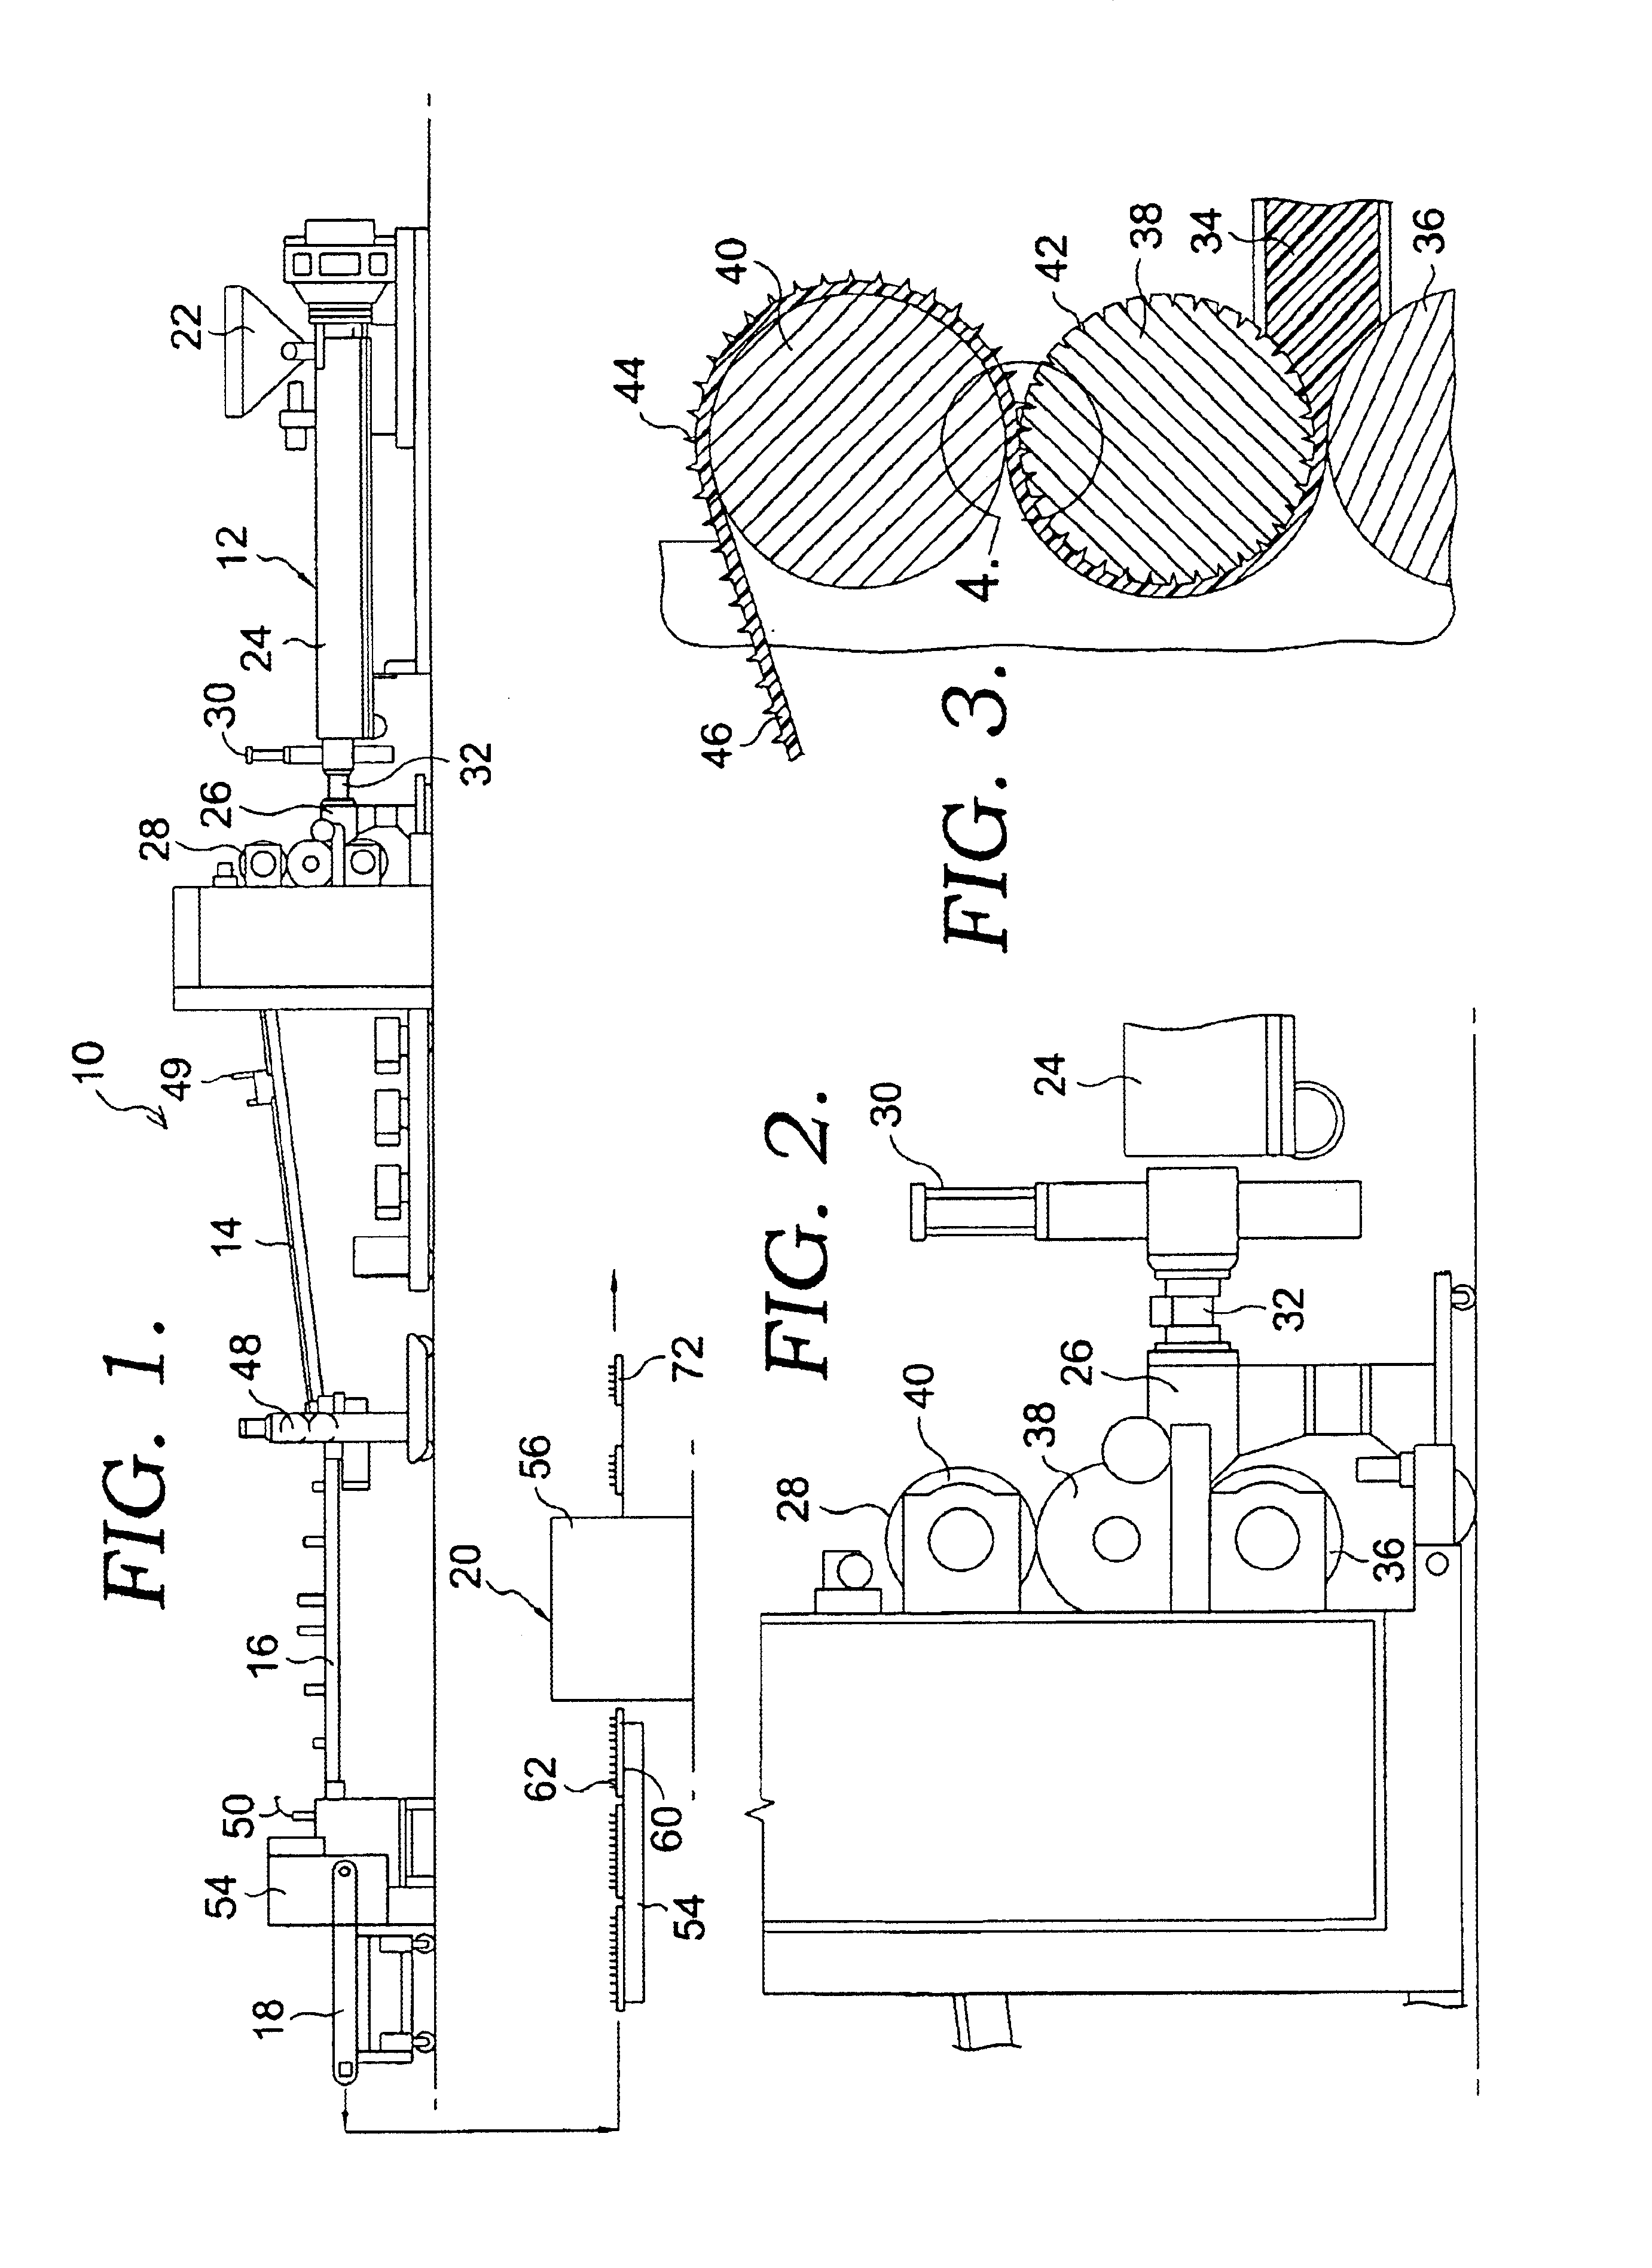 Method for producing contoured vehicle floor mats having integrally formed nibs